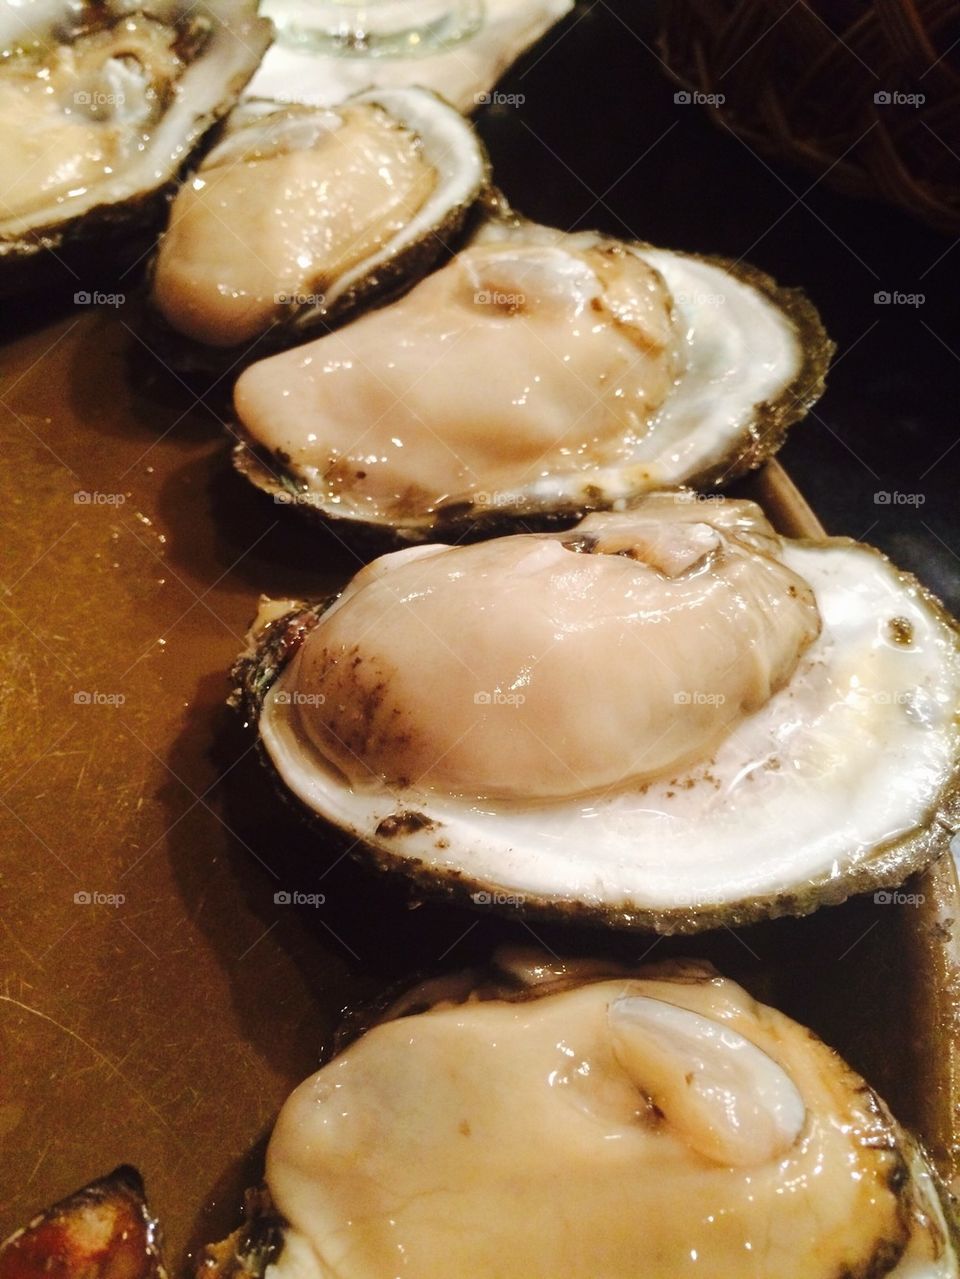 Plump Oysters